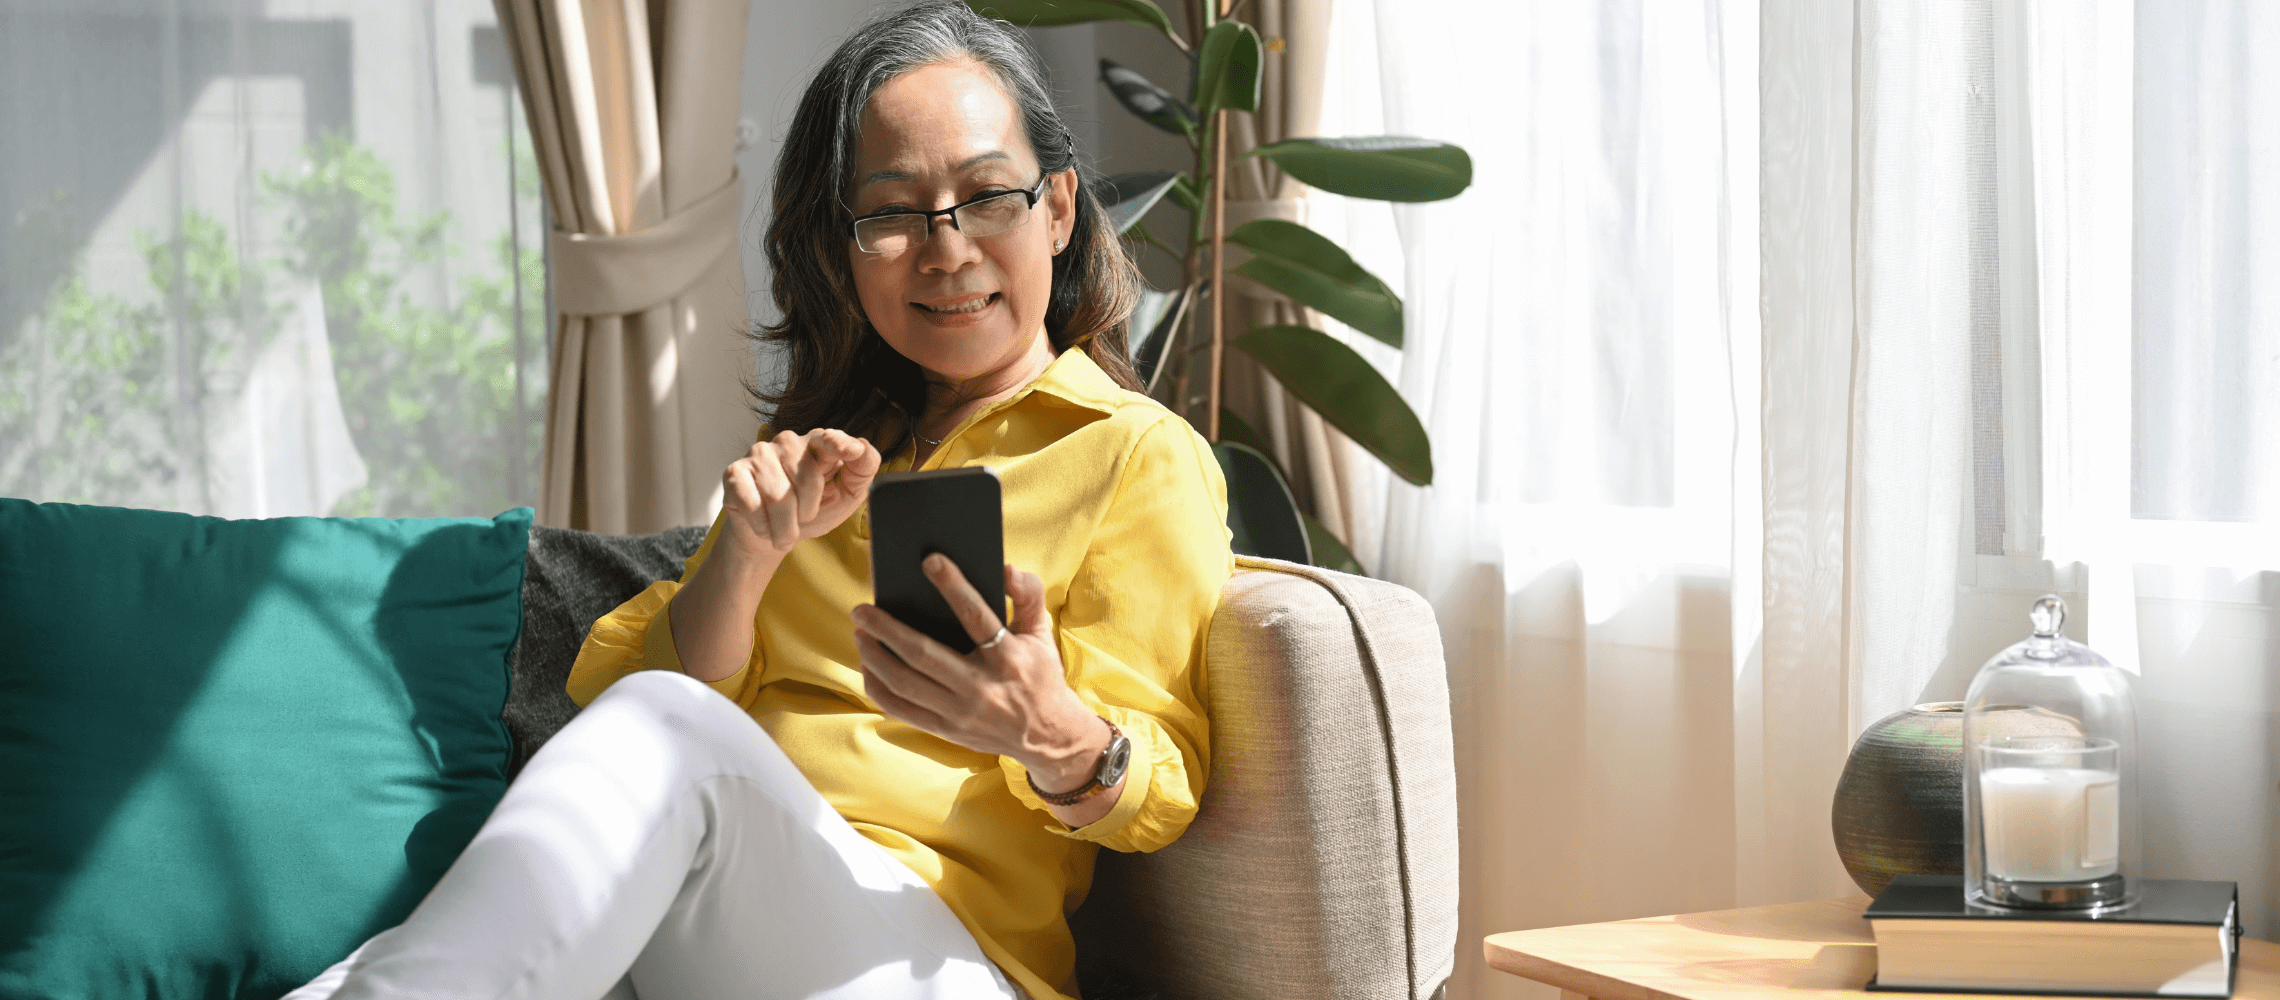 woman on couch looking at mobile phone